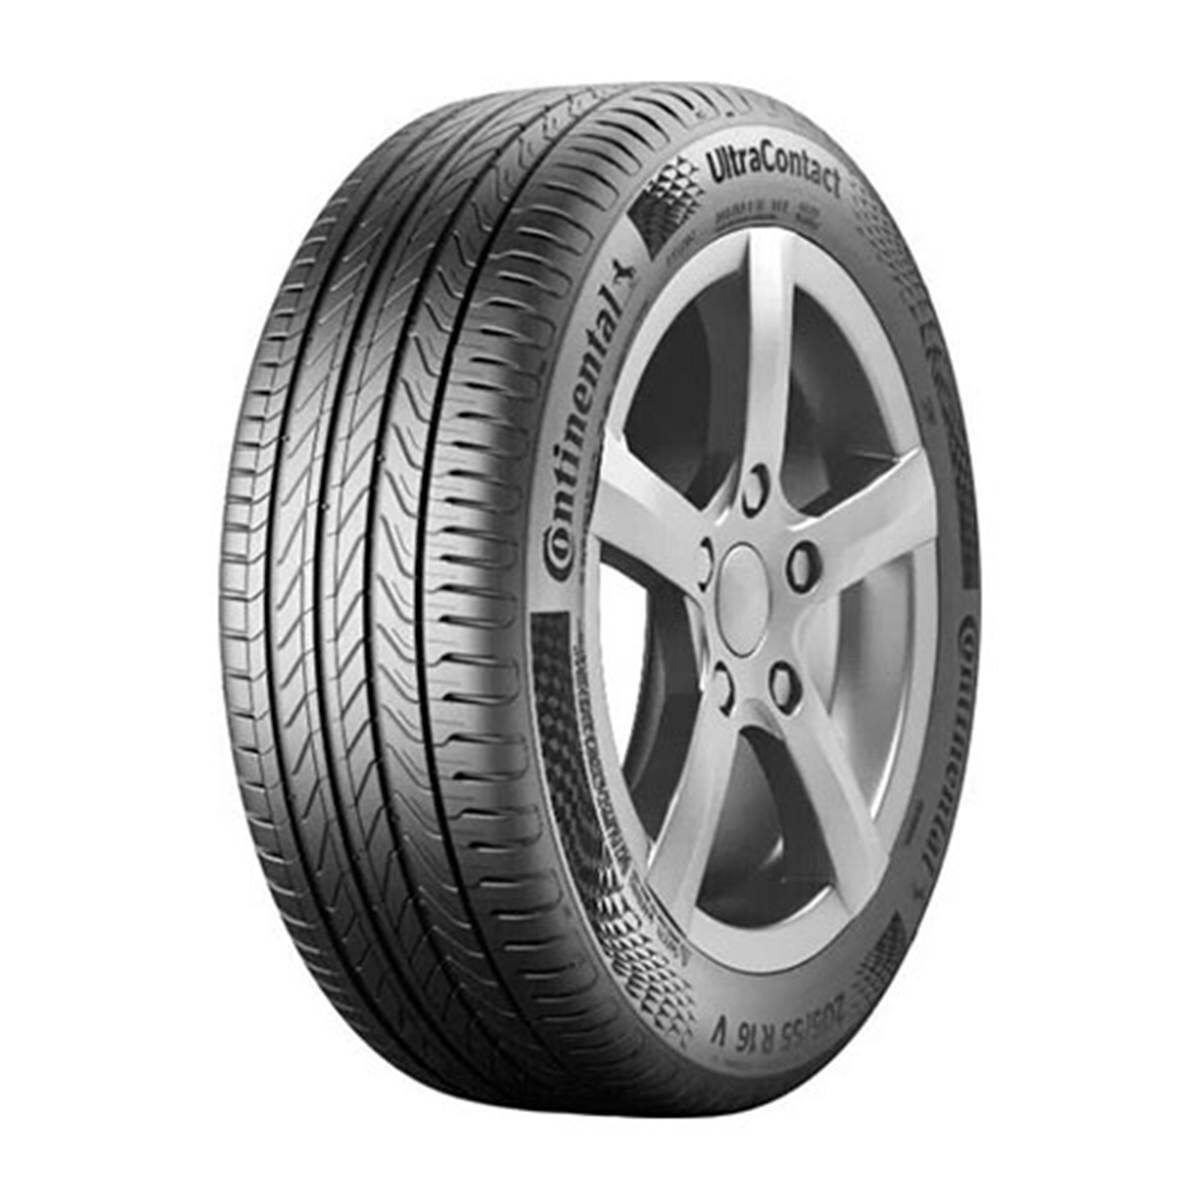 Continental Neumático  Ultracontact 155/65R14 75T